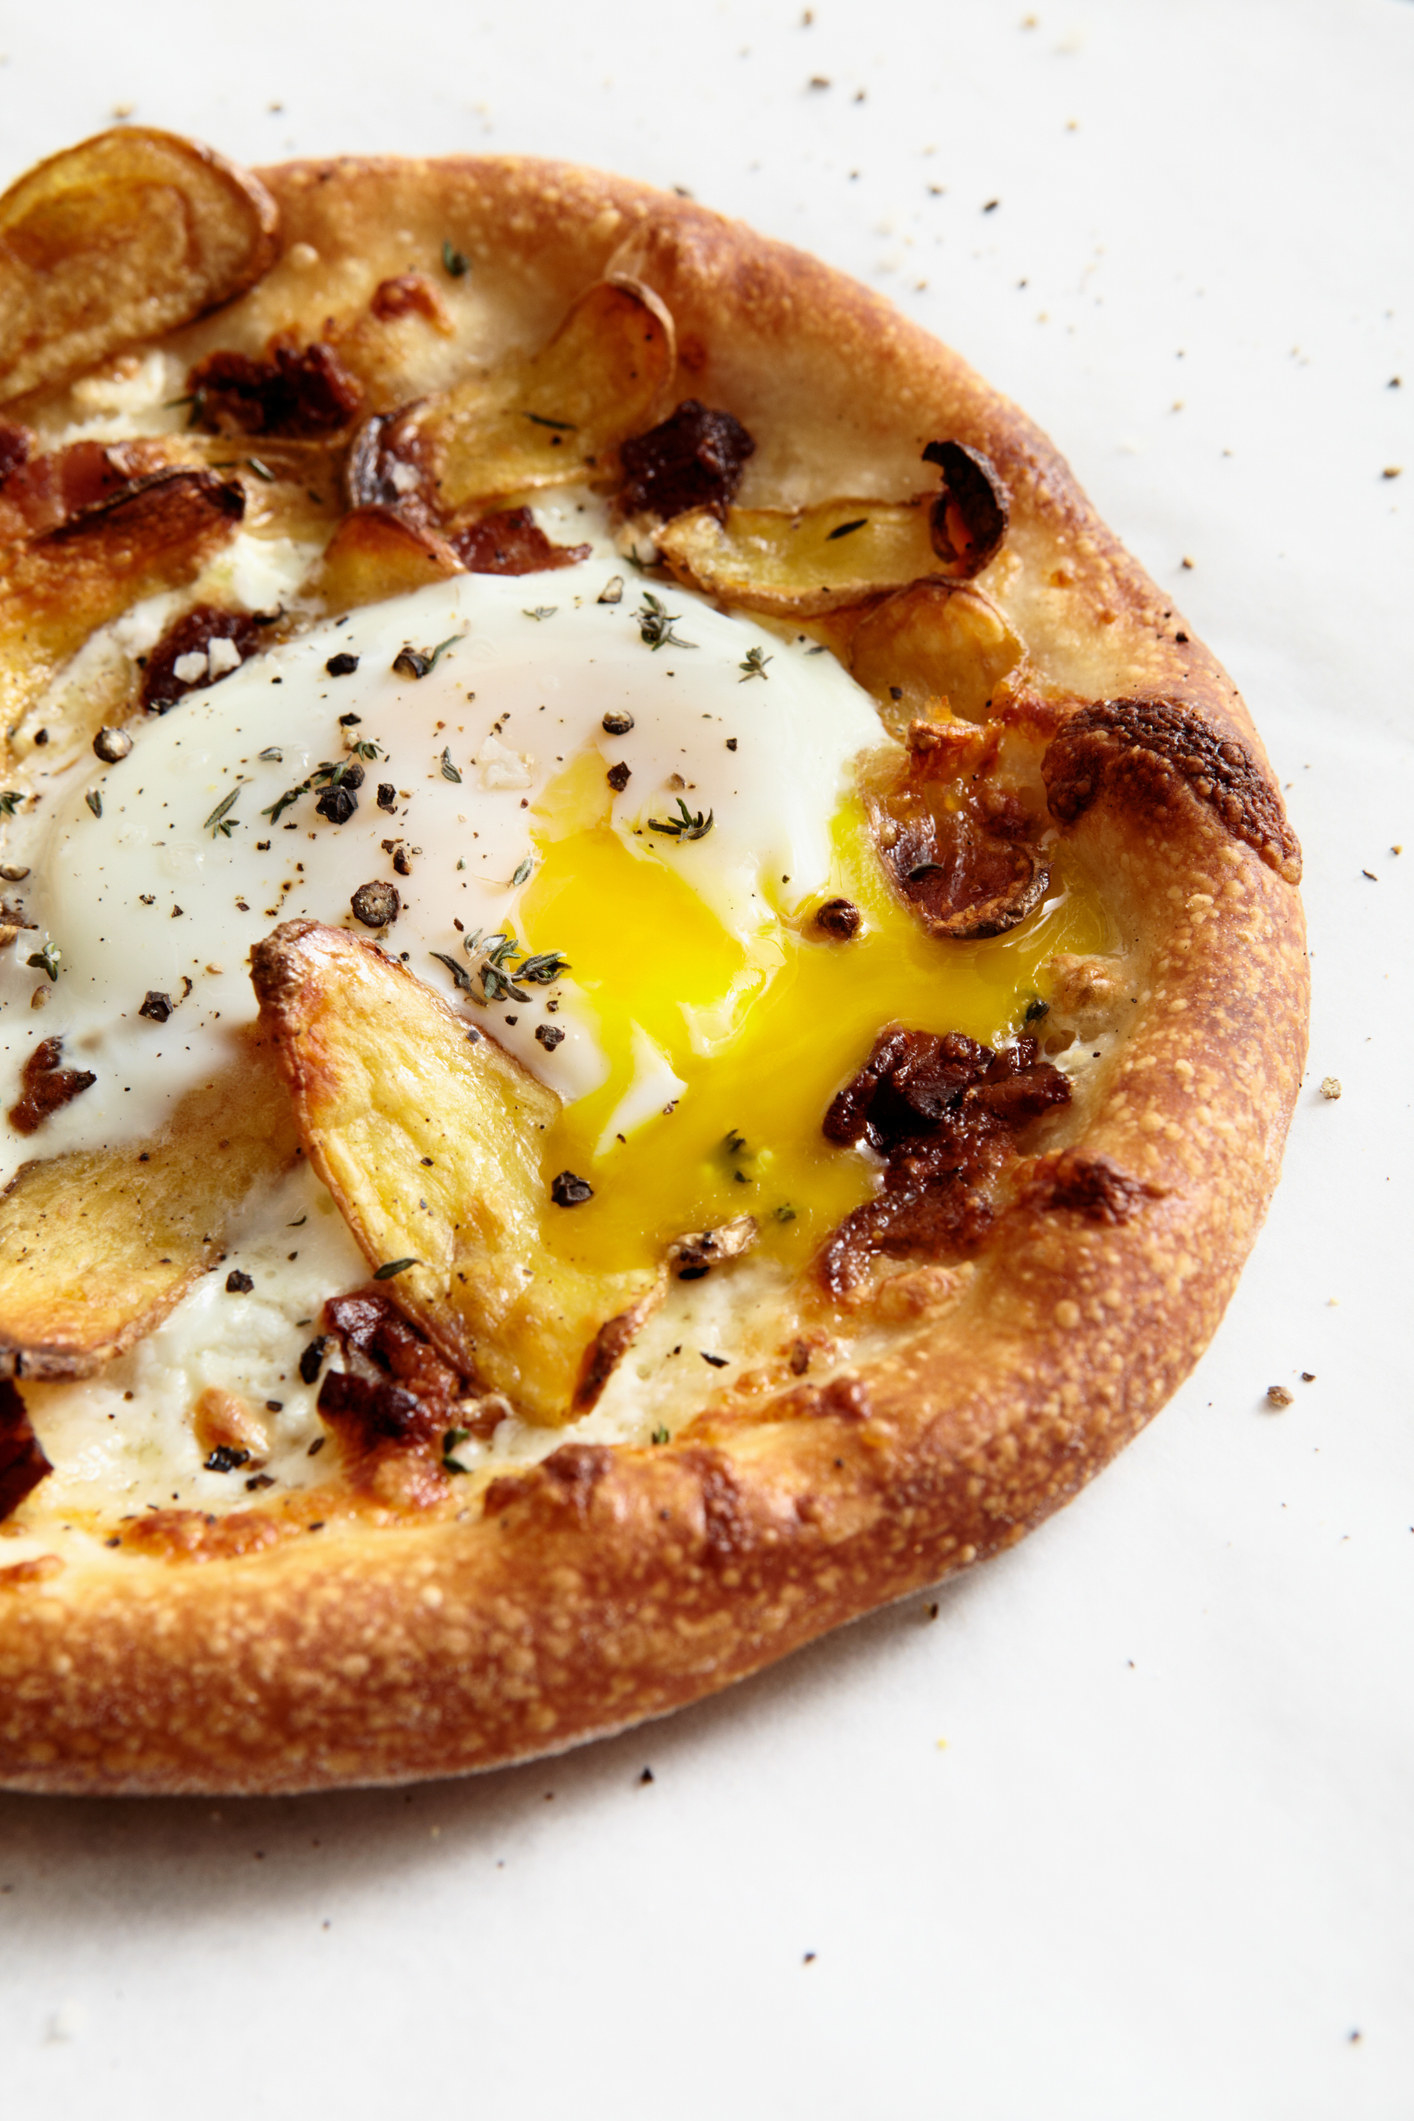 A pizza with a fried egg.